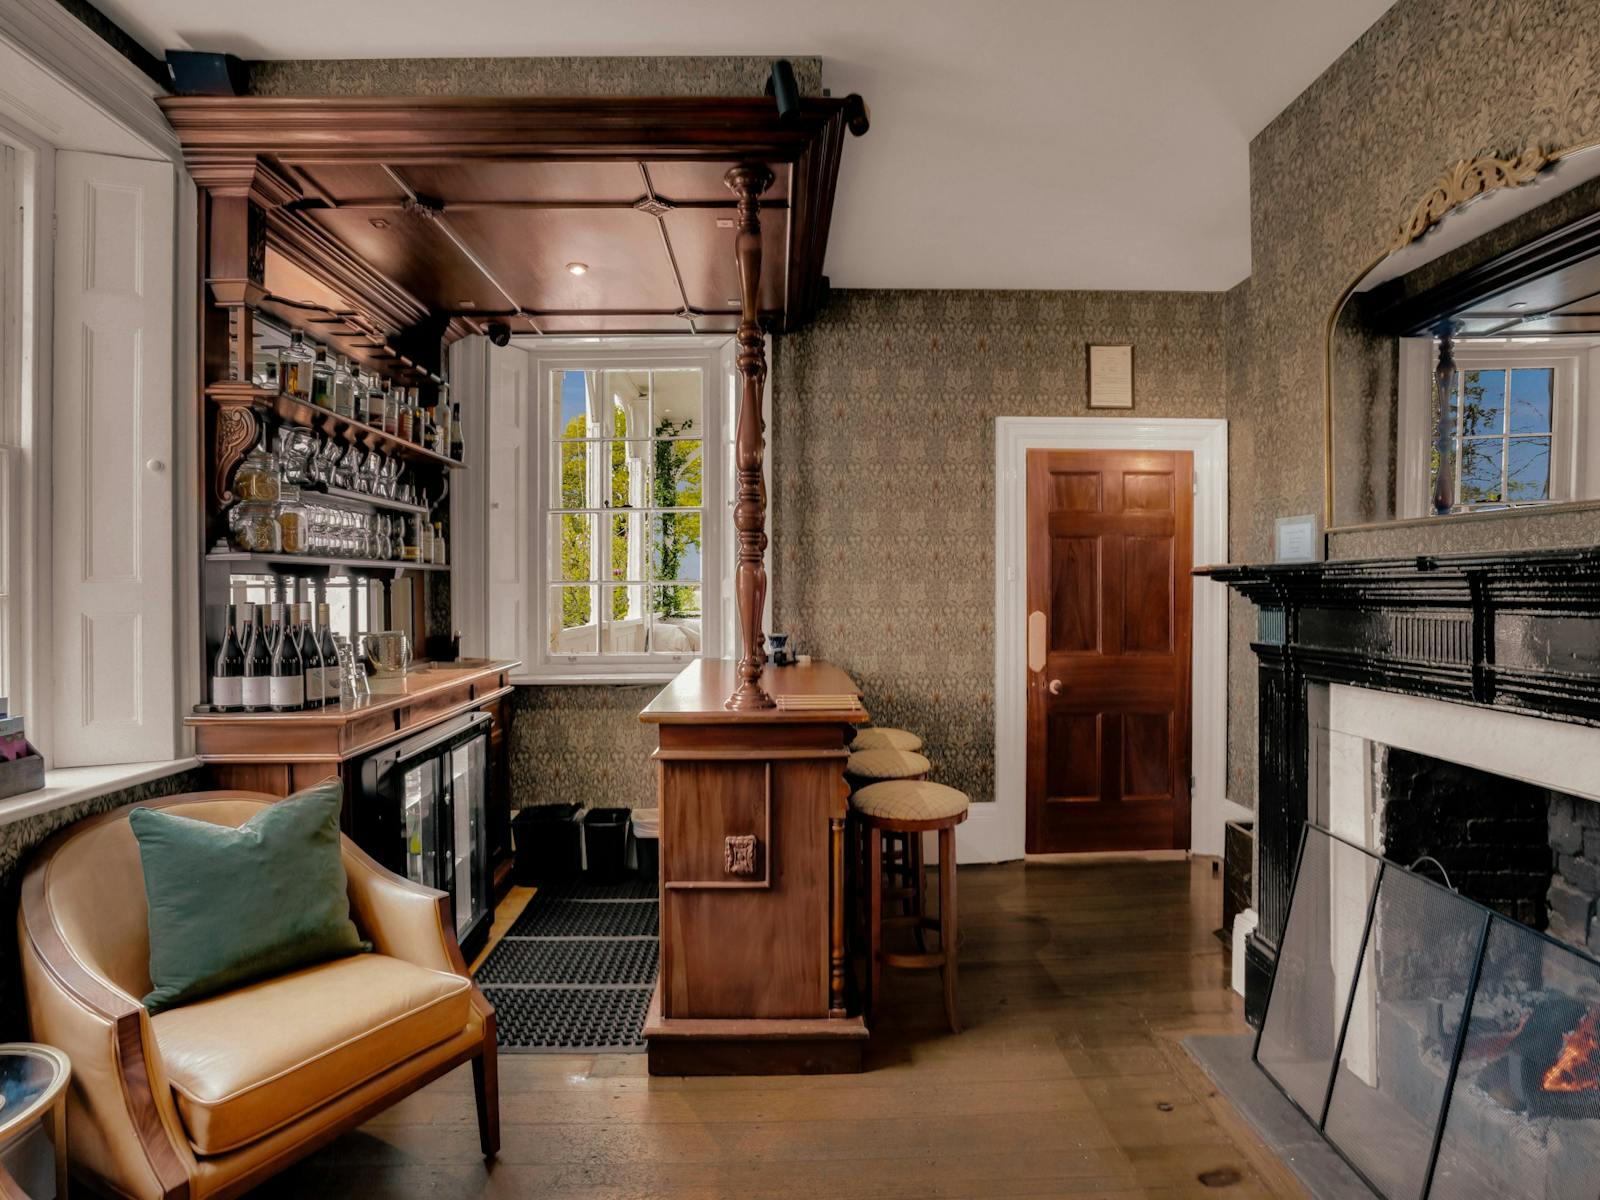 Small wallpapered room with wooden bar stocked with alcohol, open fire place and chairs